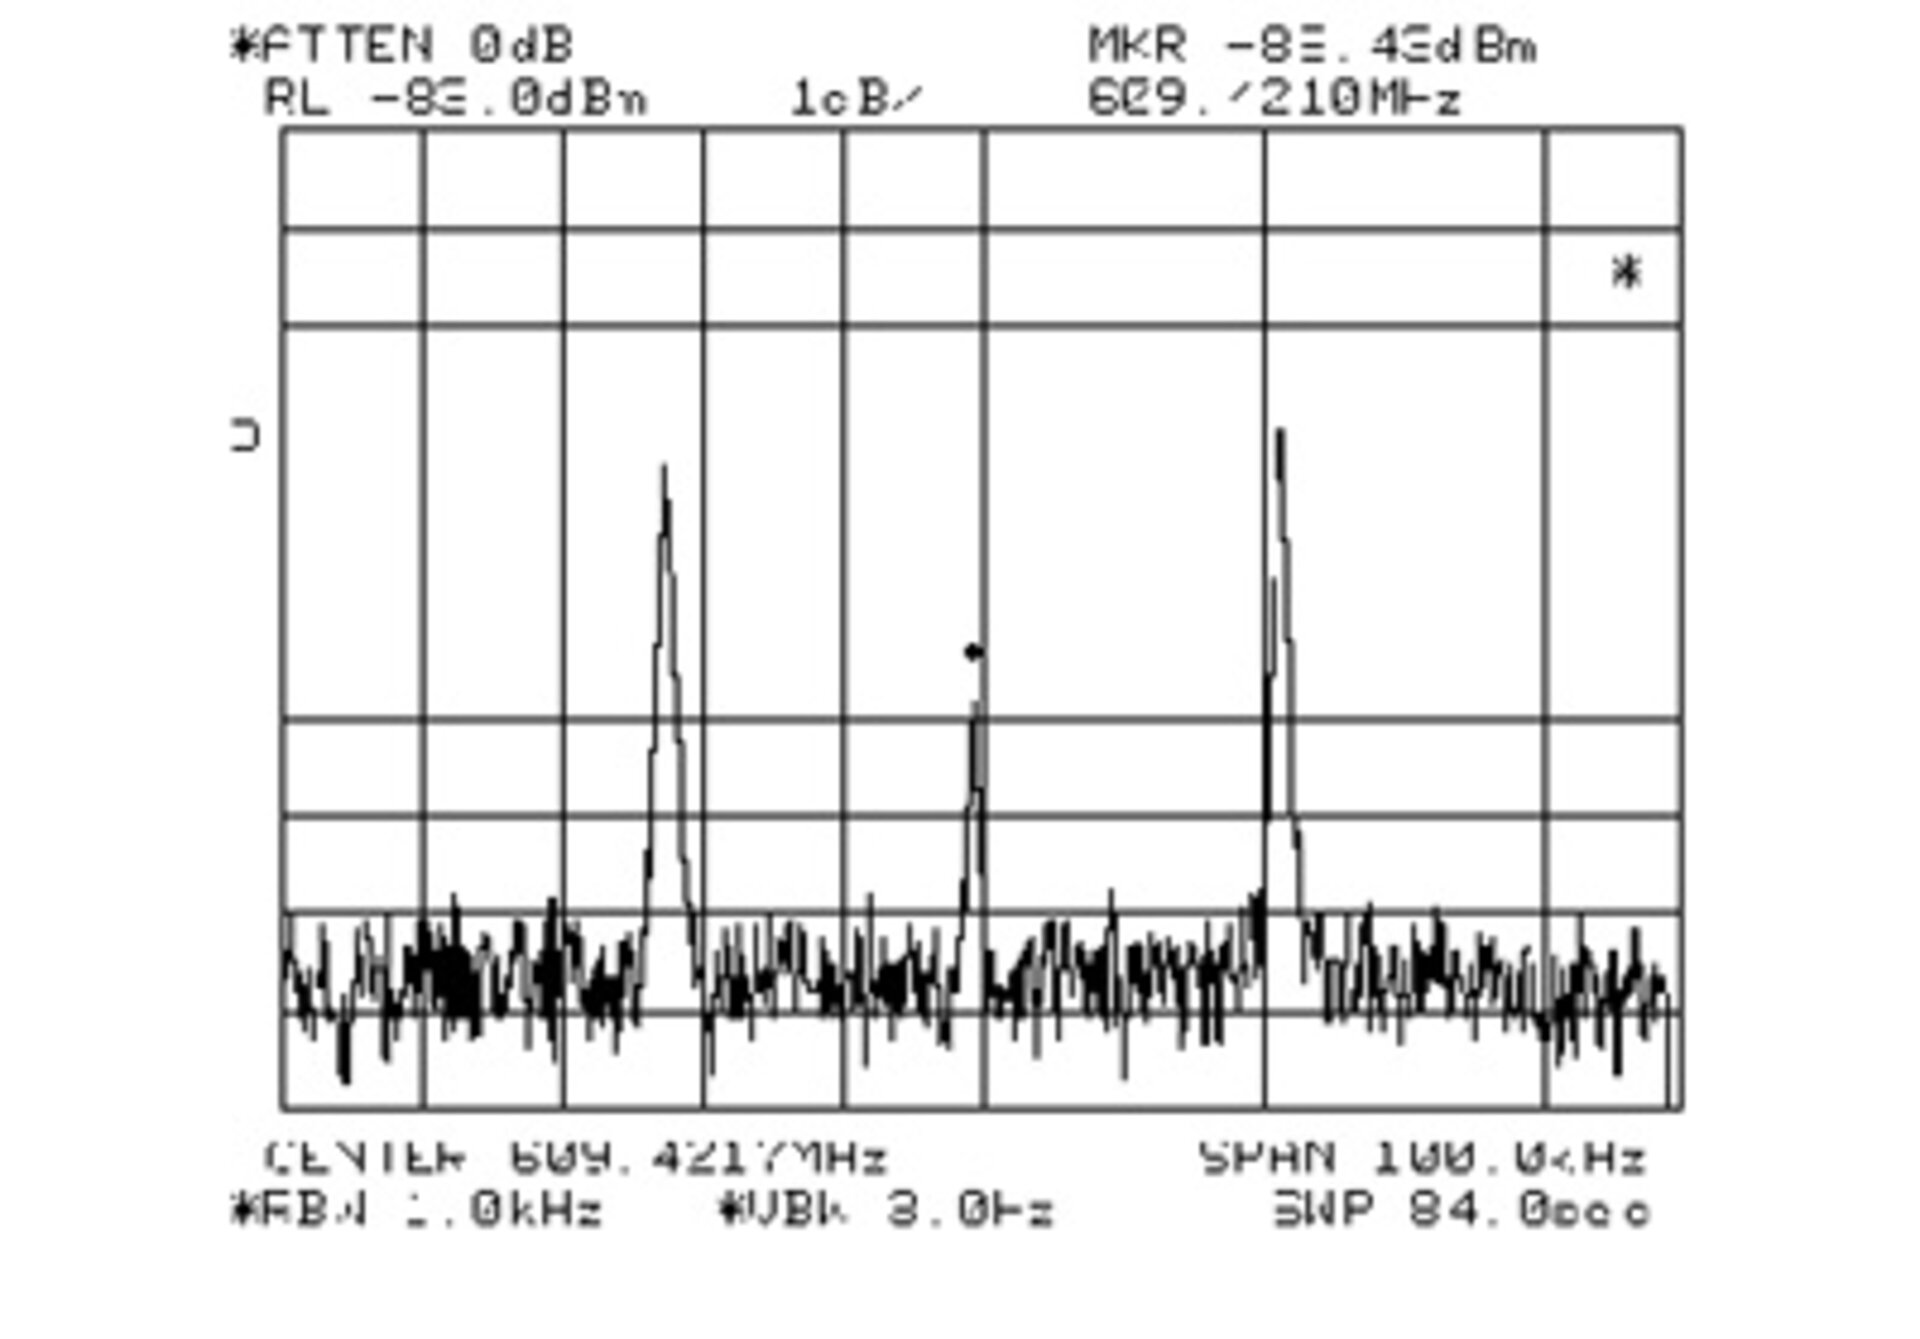 Spectrum analyser display indicating first signals received from Stardust at DSA 1